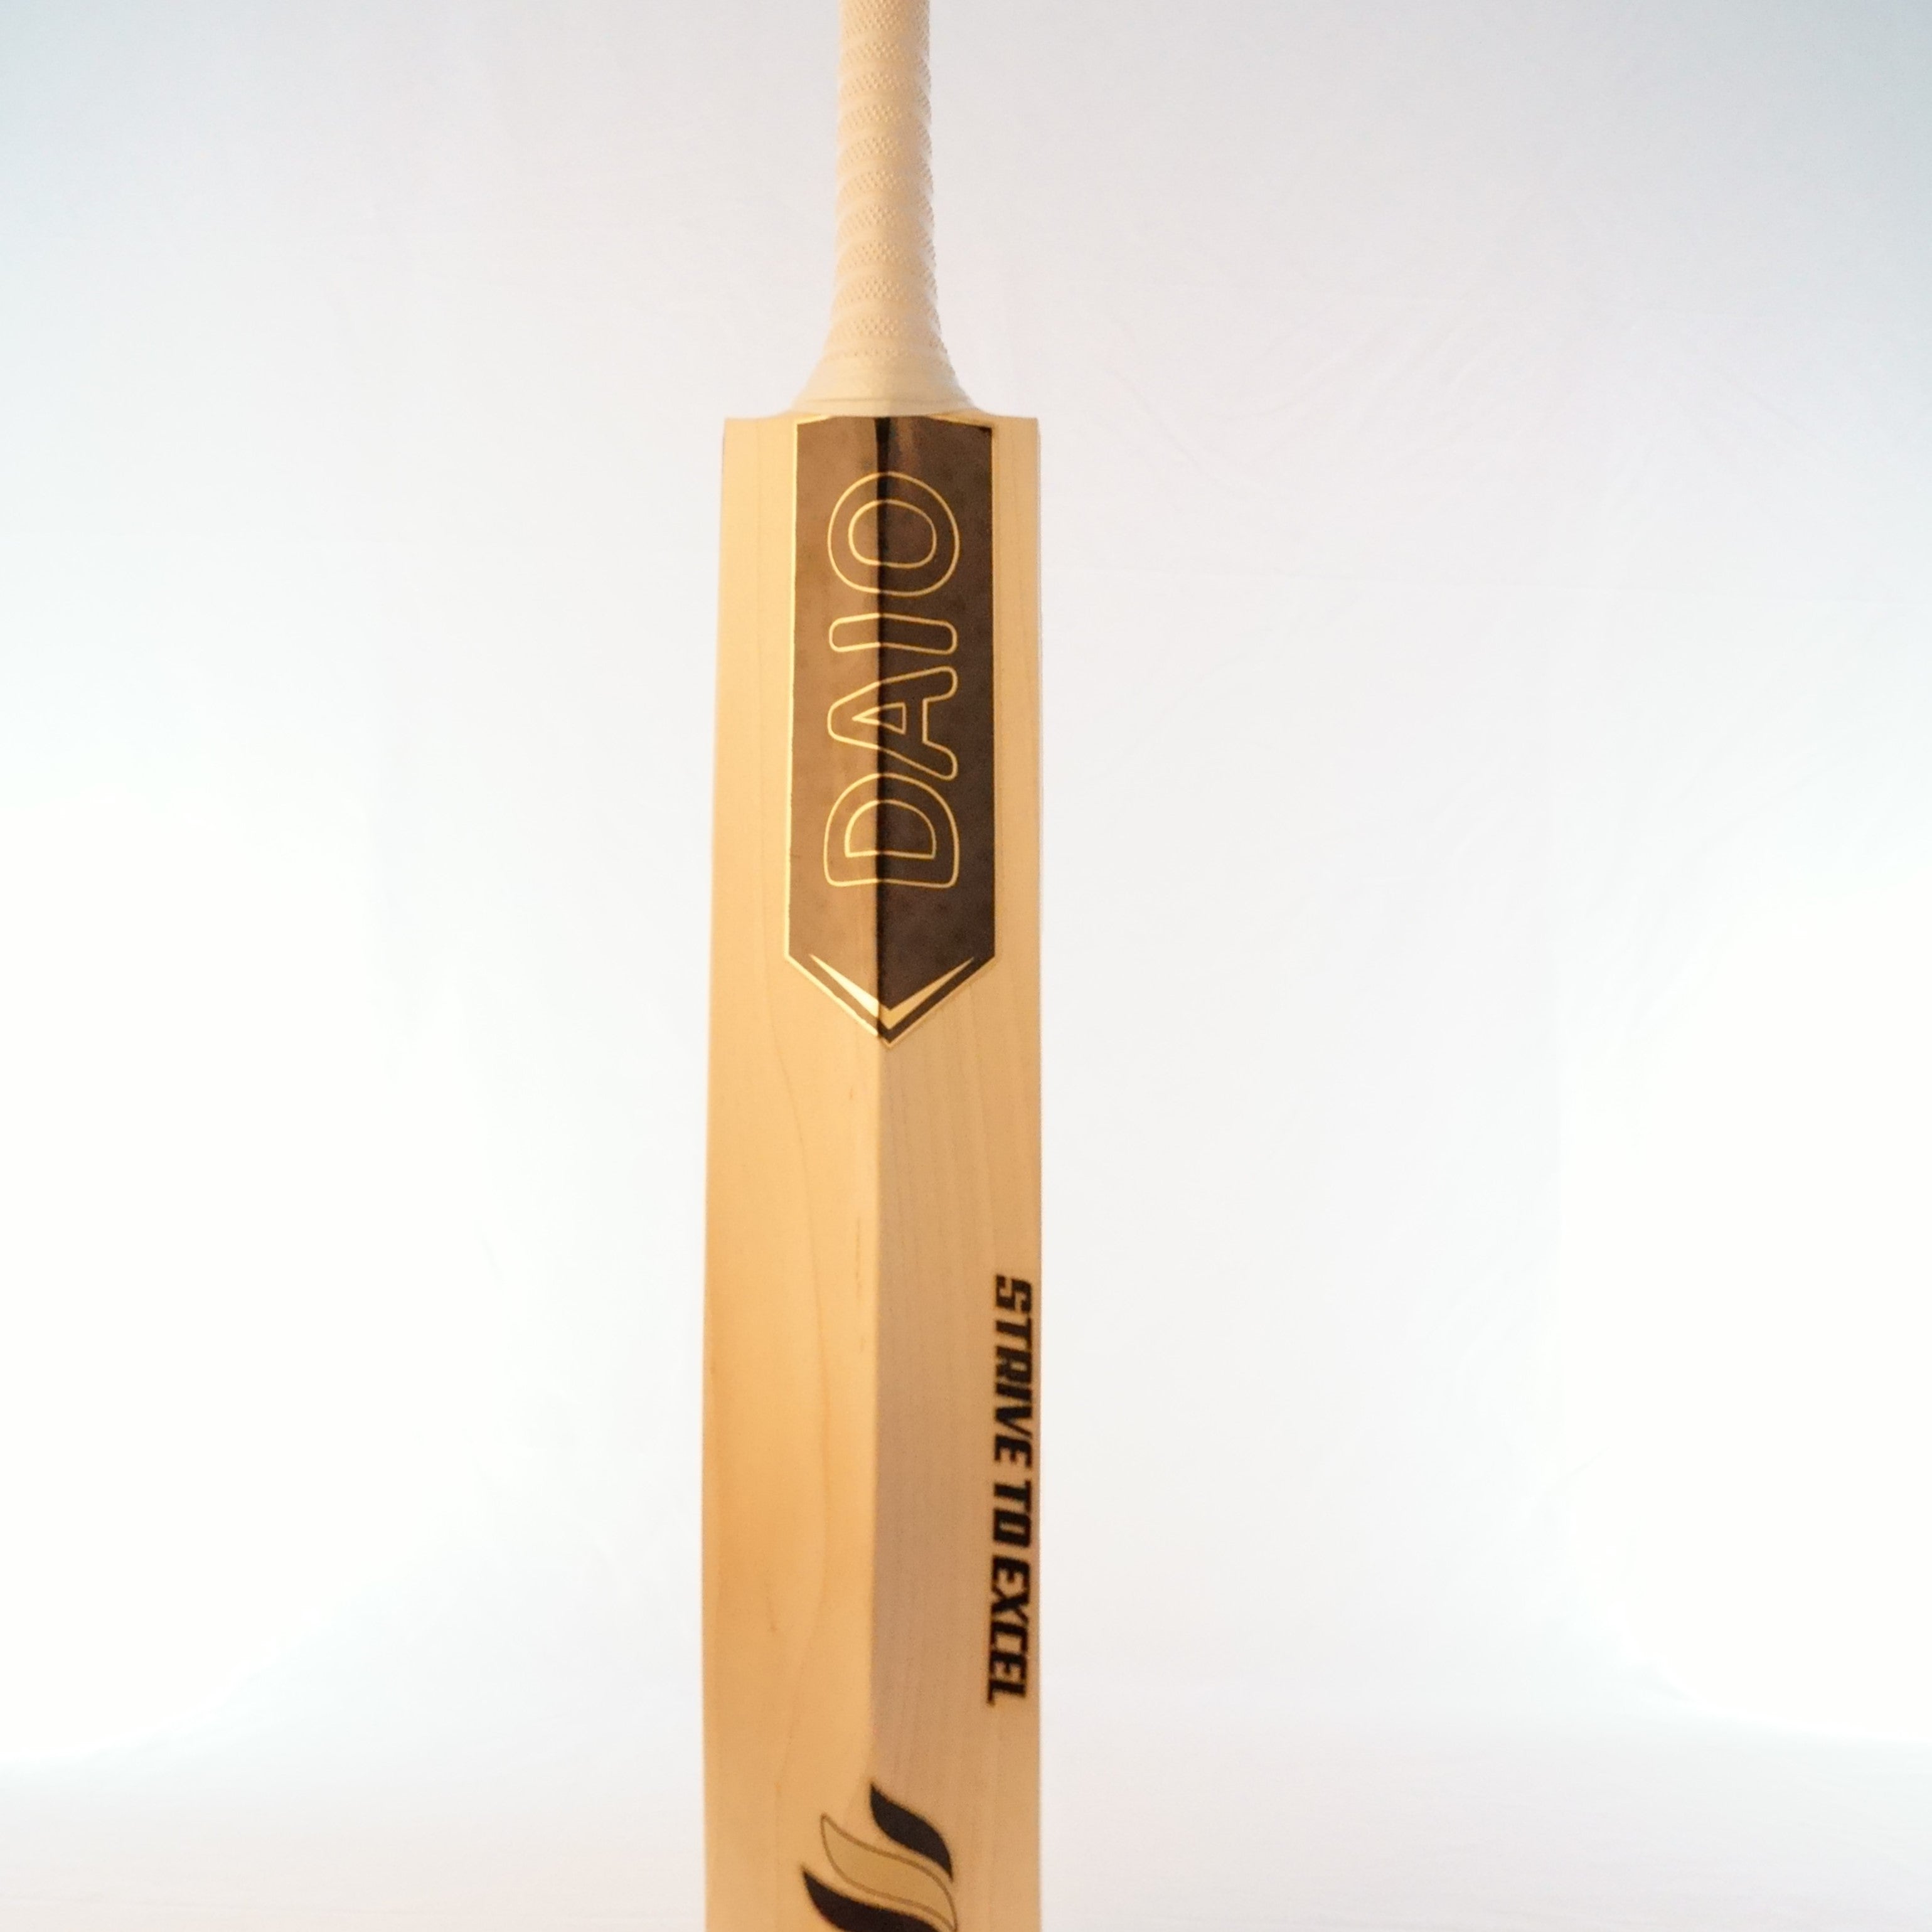 Daio Signature-X English willow cricket bat size 5 & 6 only